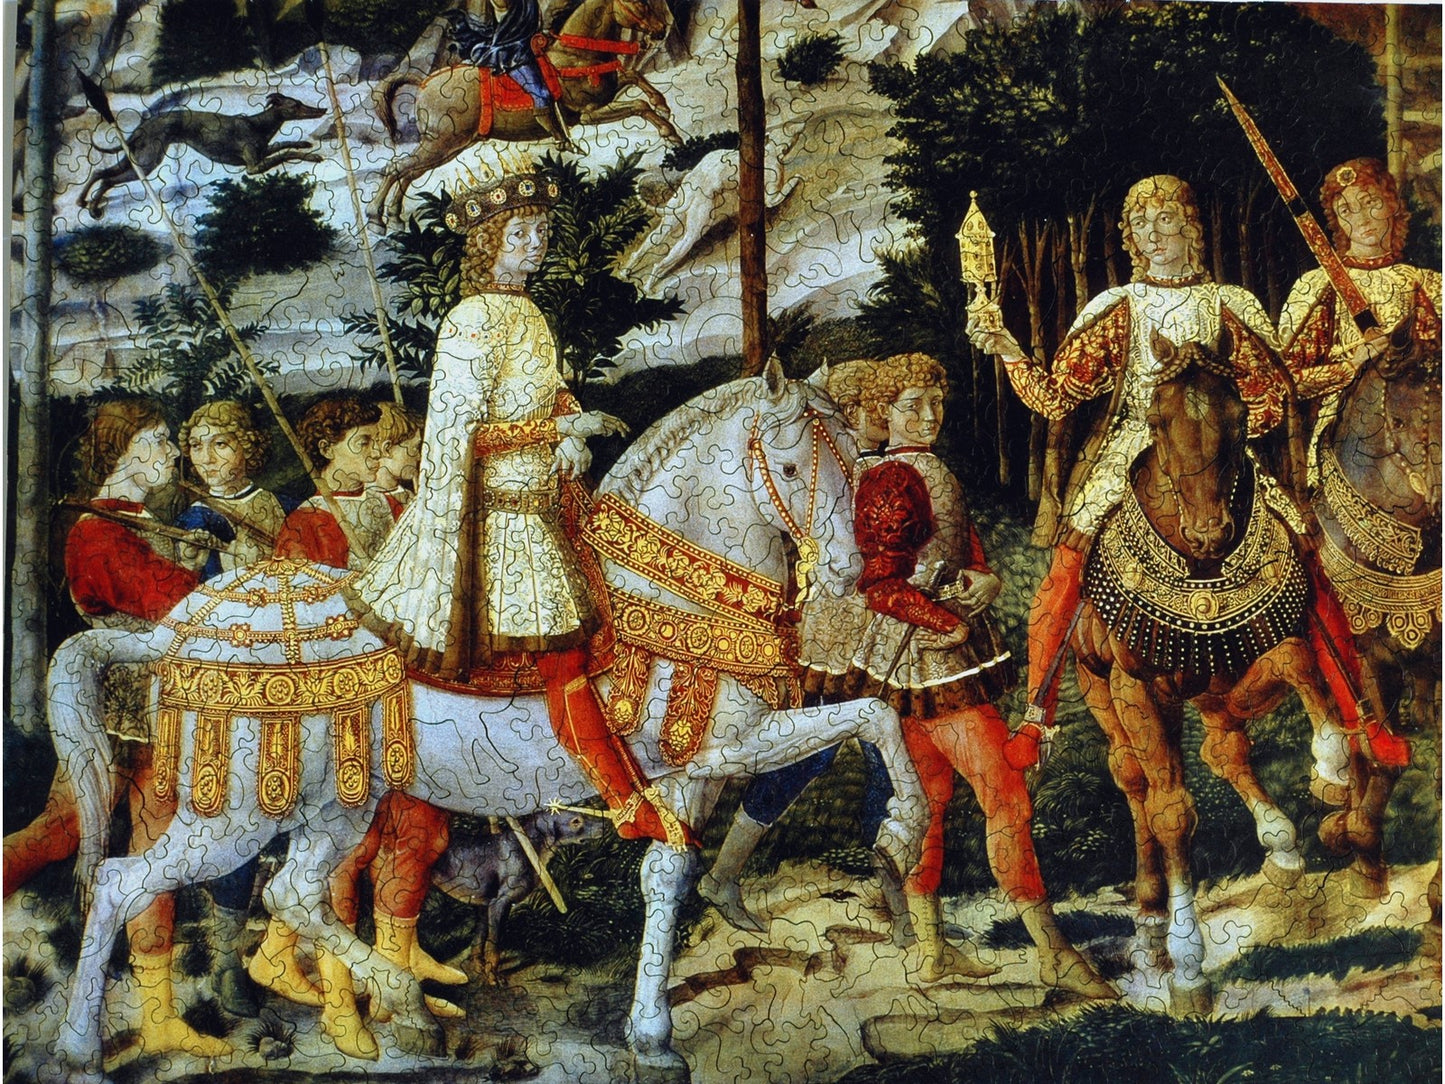 The front of the puzzle, Journey of the Magi, which shows kings on horses.